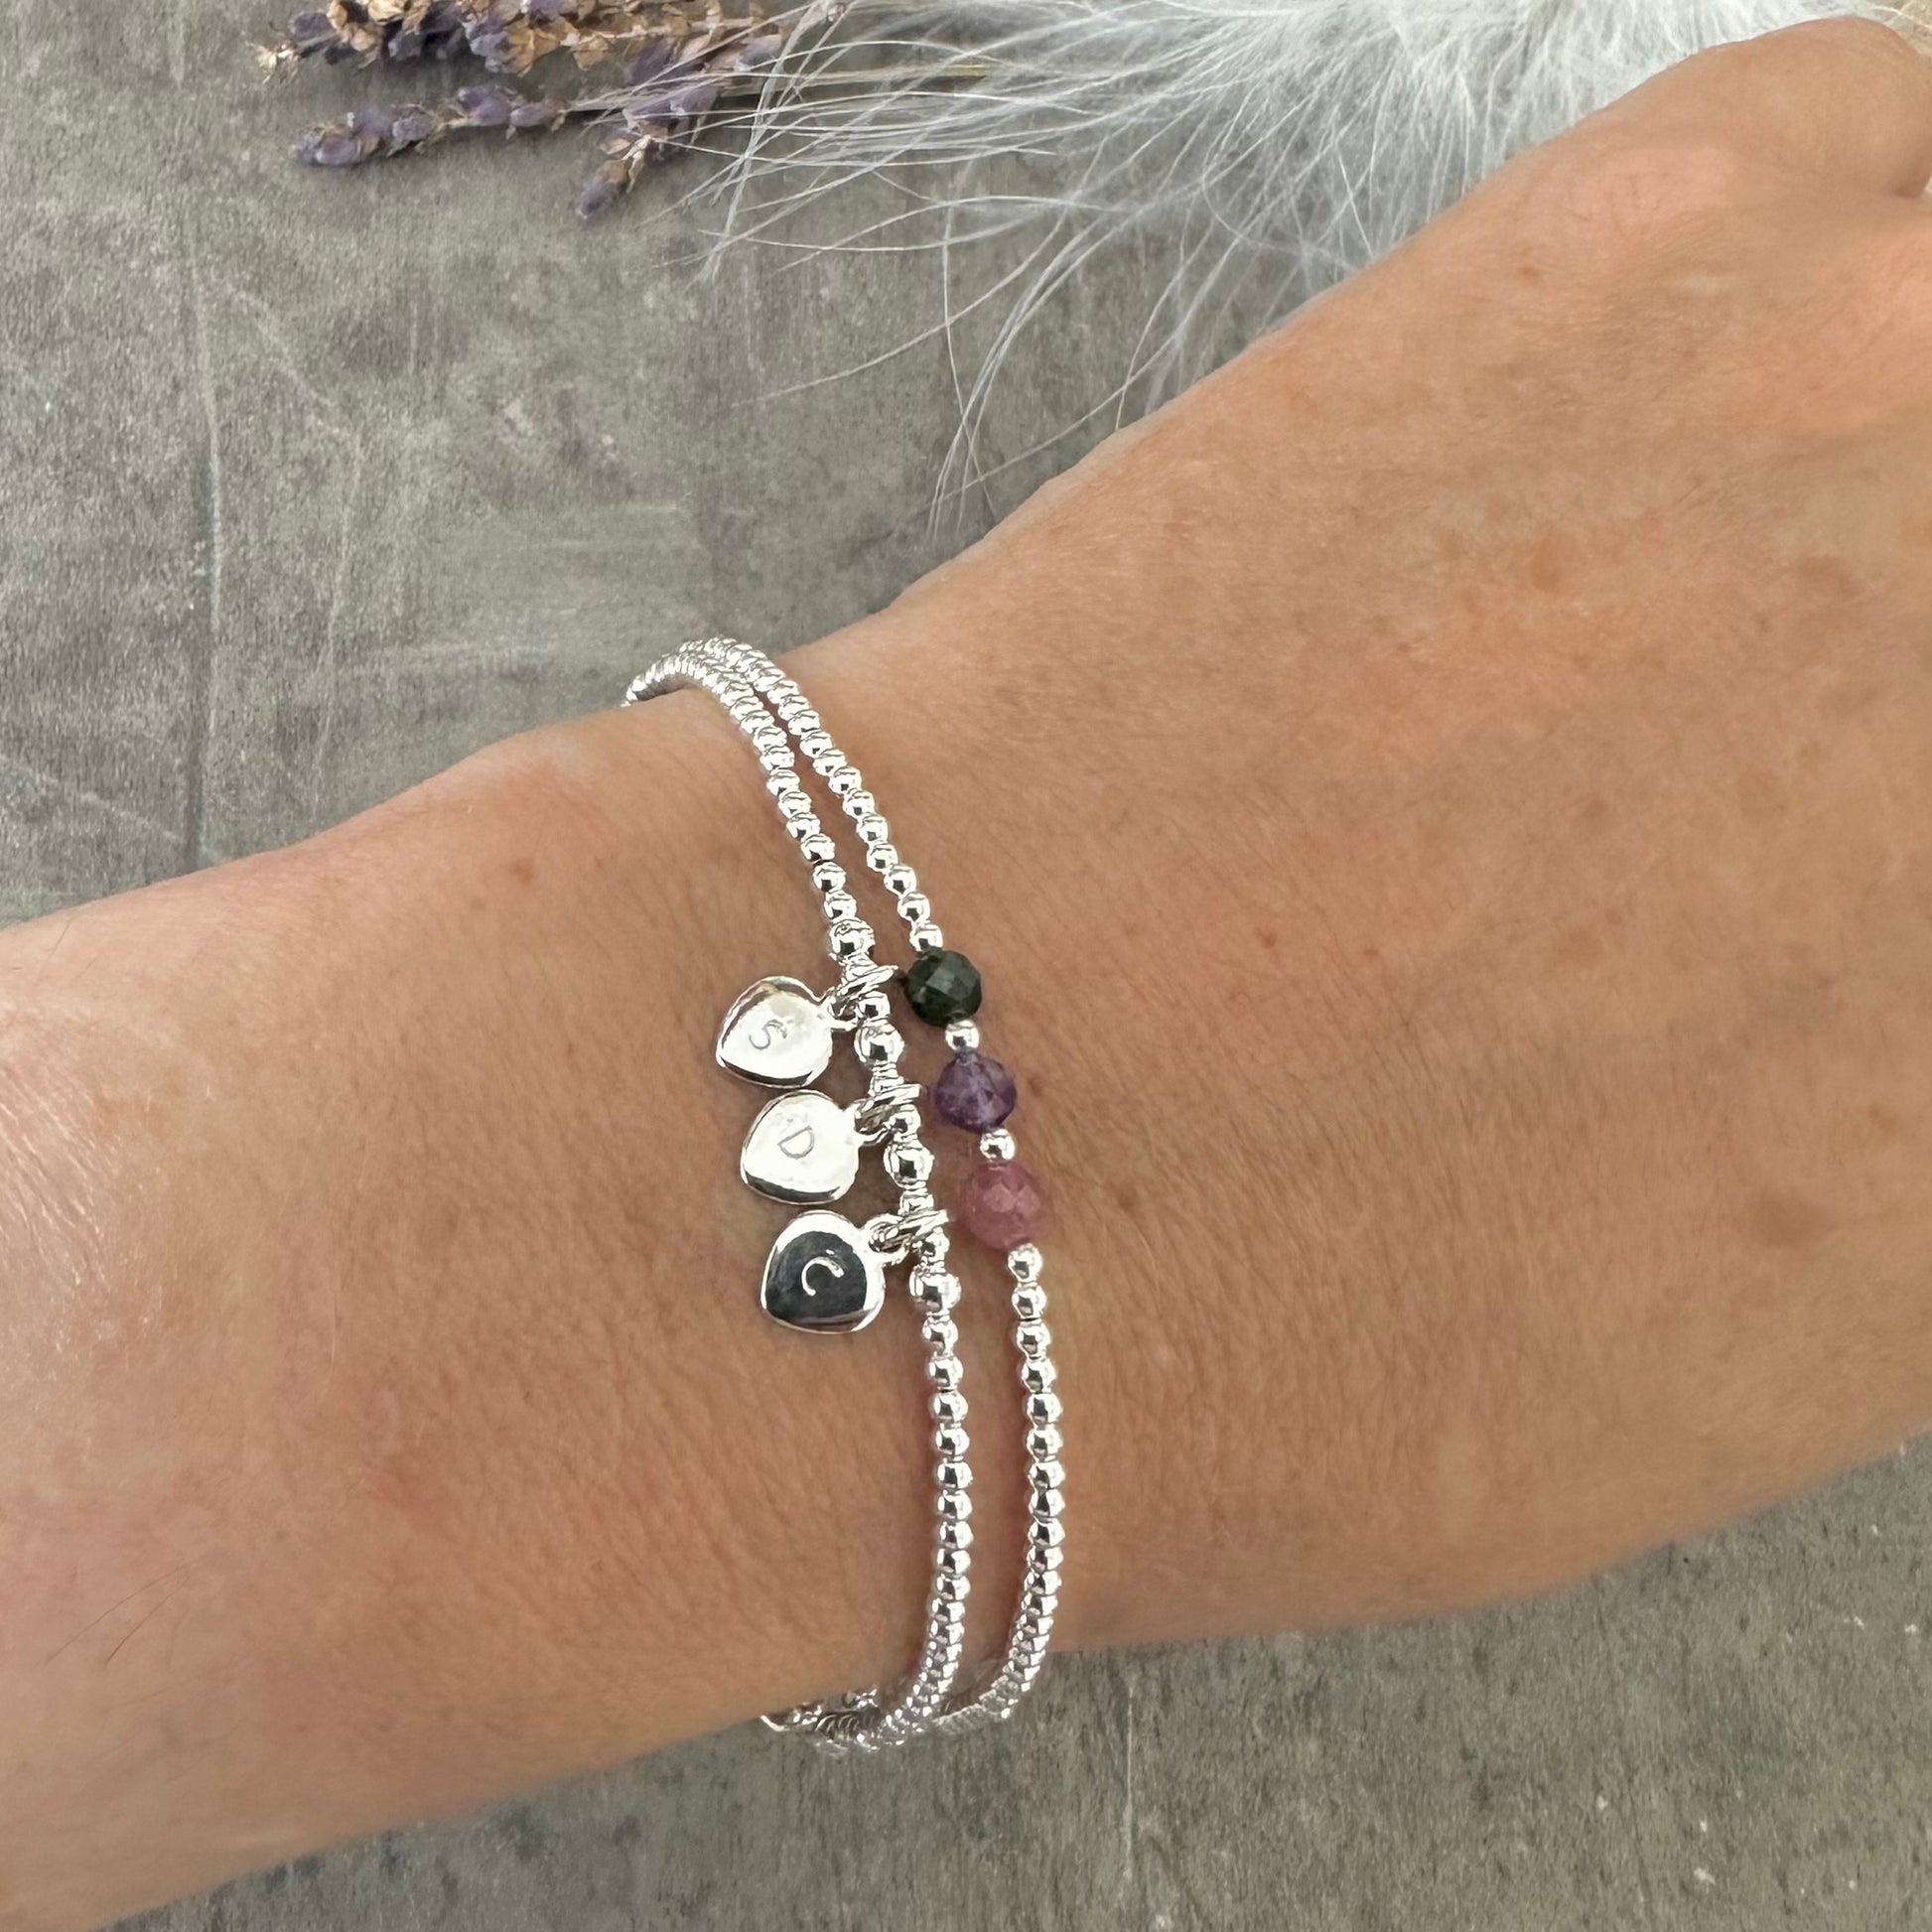 Personalised Family Birthstones & Initials Double Bracelet Set, Dainty Family Jewellery Set Sterling Silver